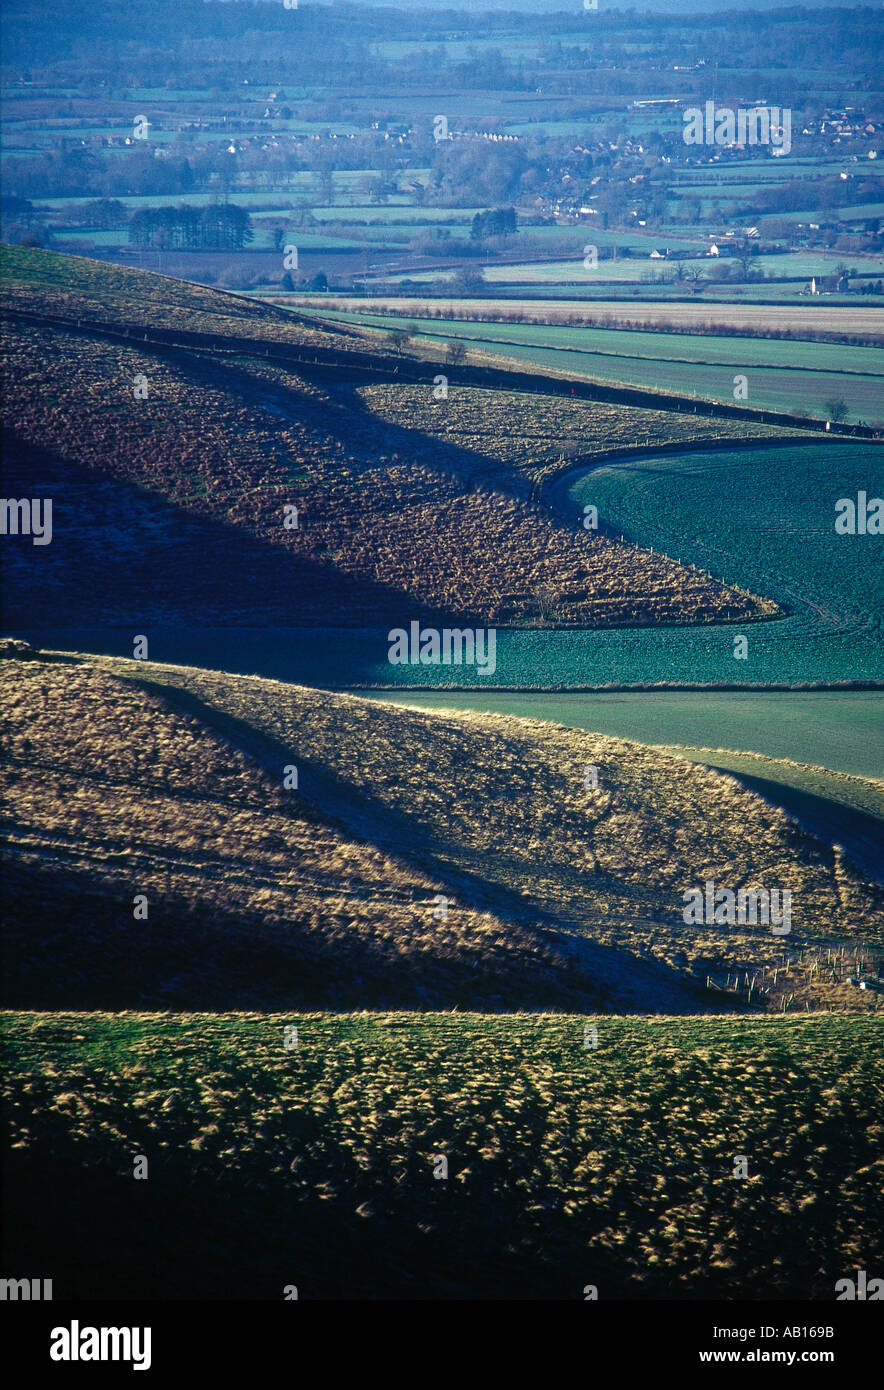 CHERHILL DOWNS WILTSHIRE ENGLAND Europe Wiltshire Stock Photo